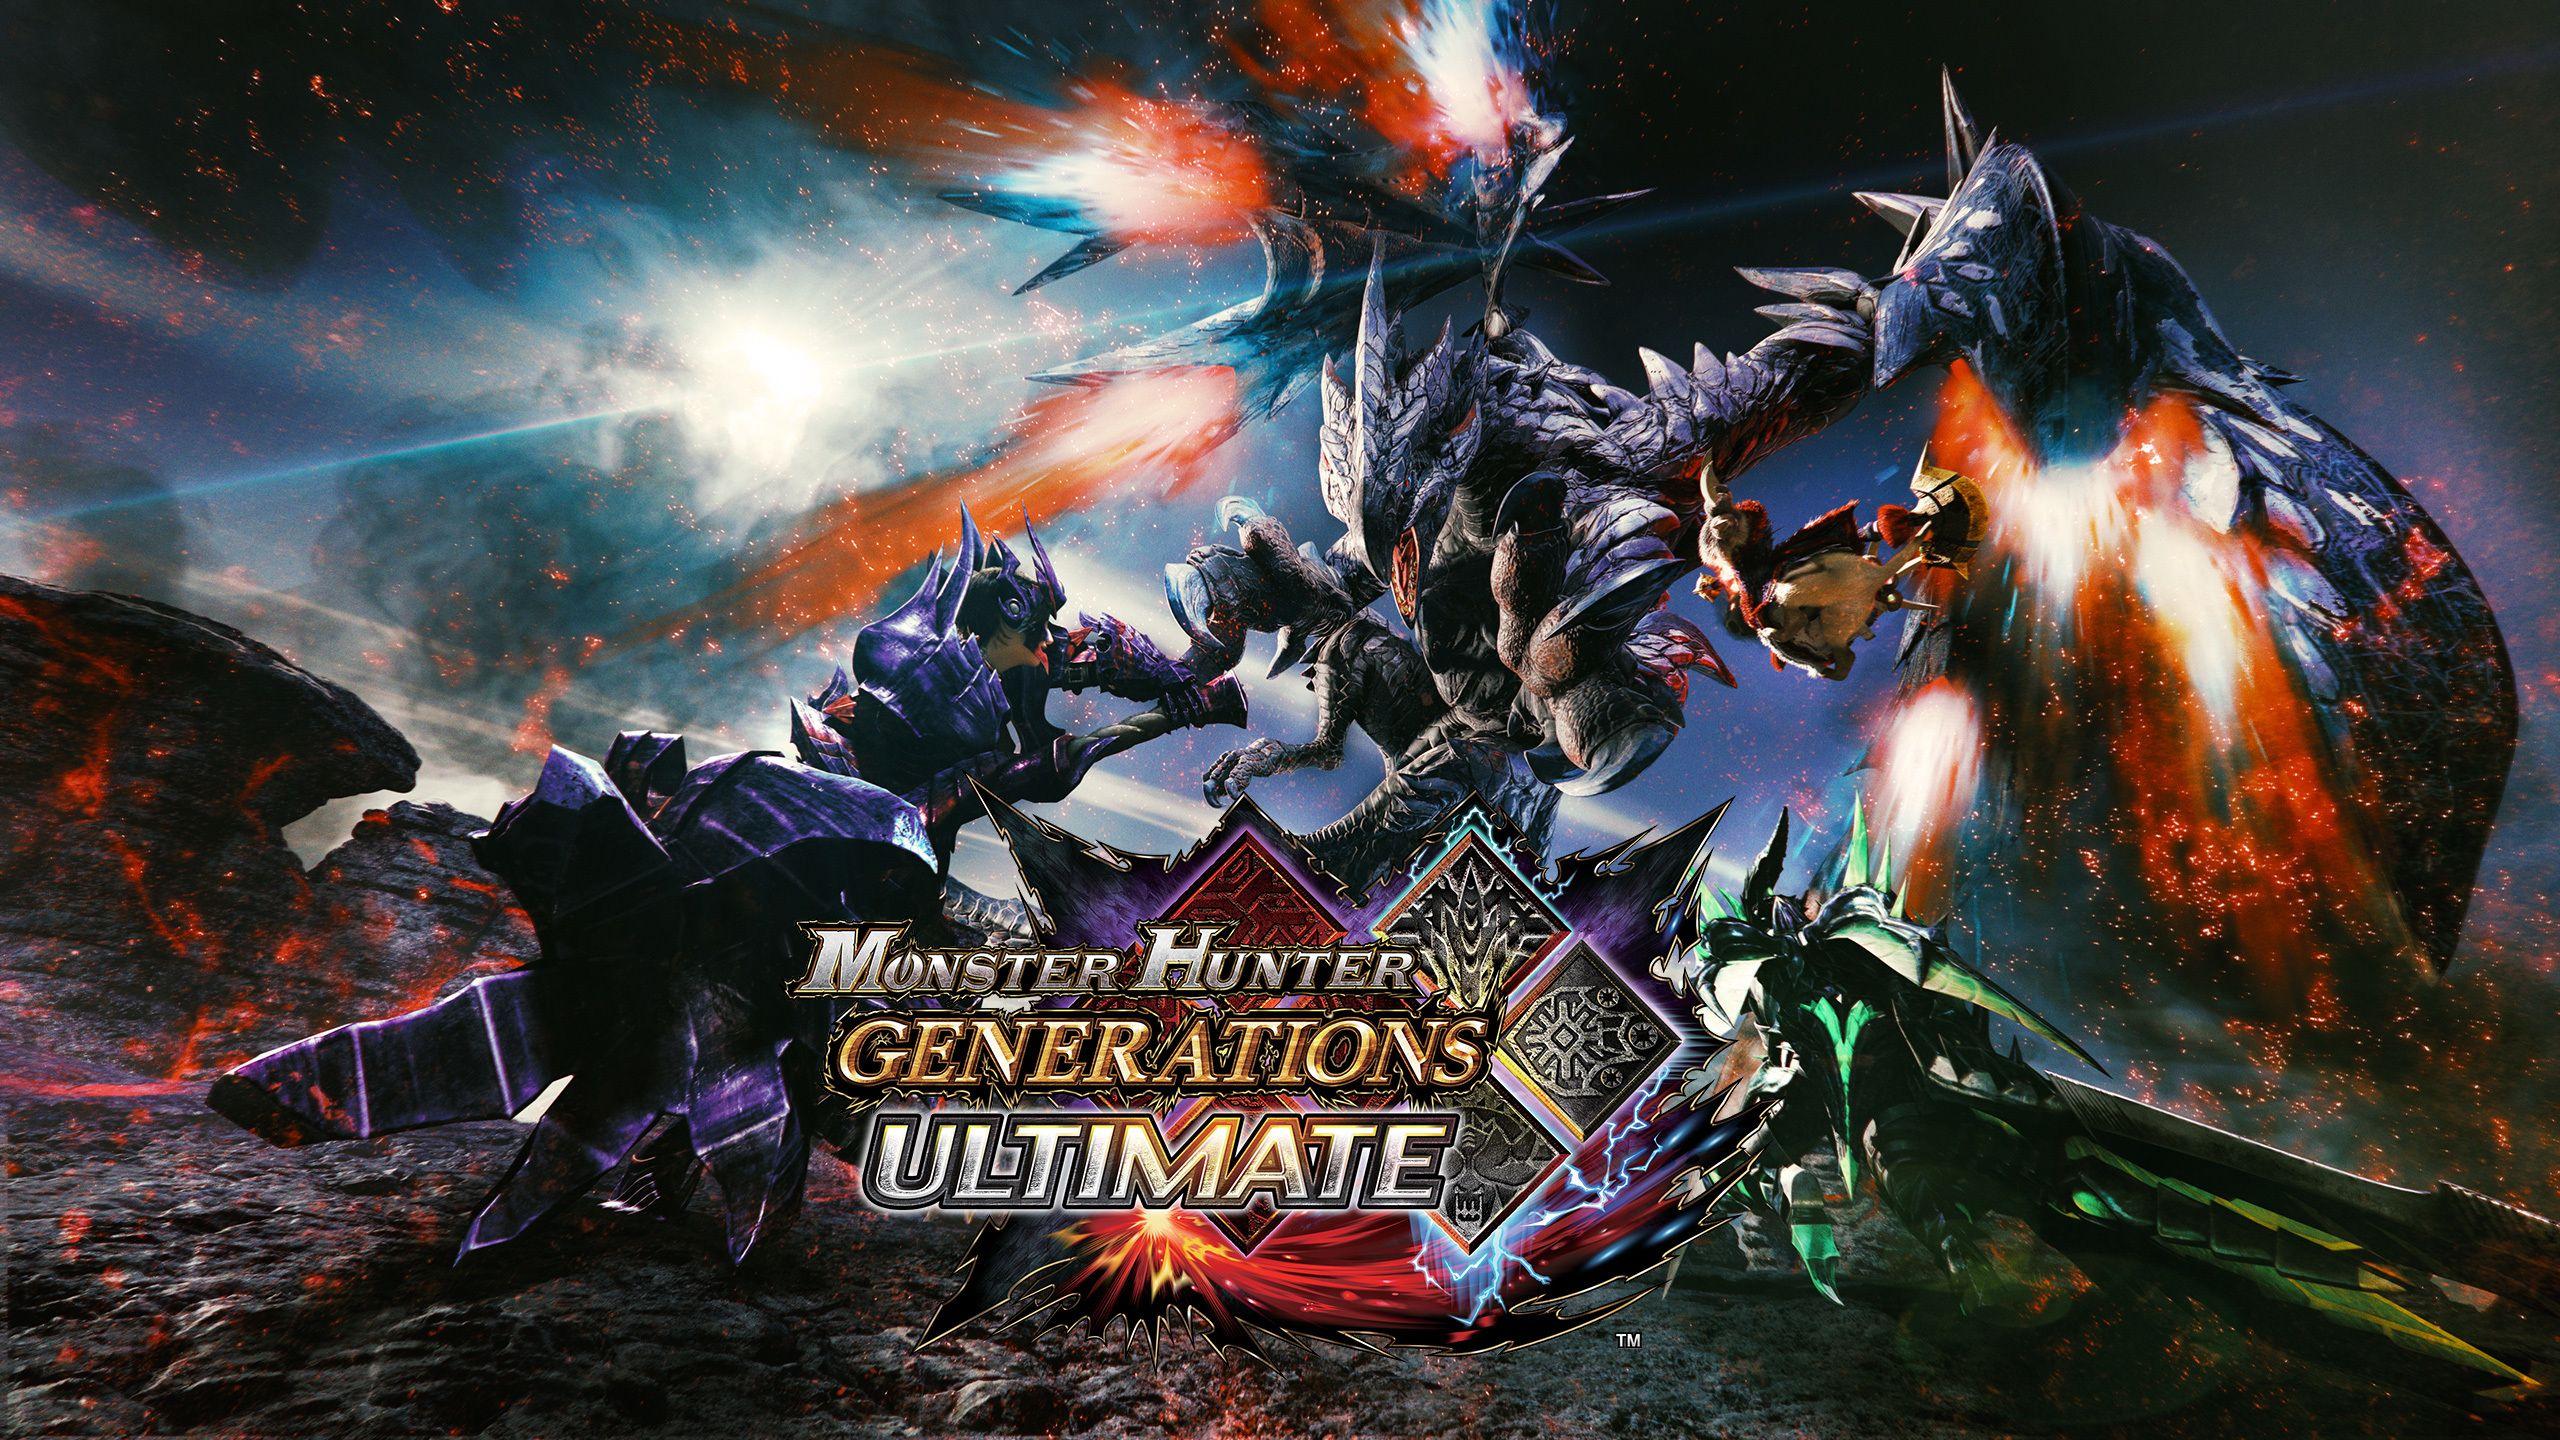 Monster Hunter Generations Ultimate screenshots, image and picture